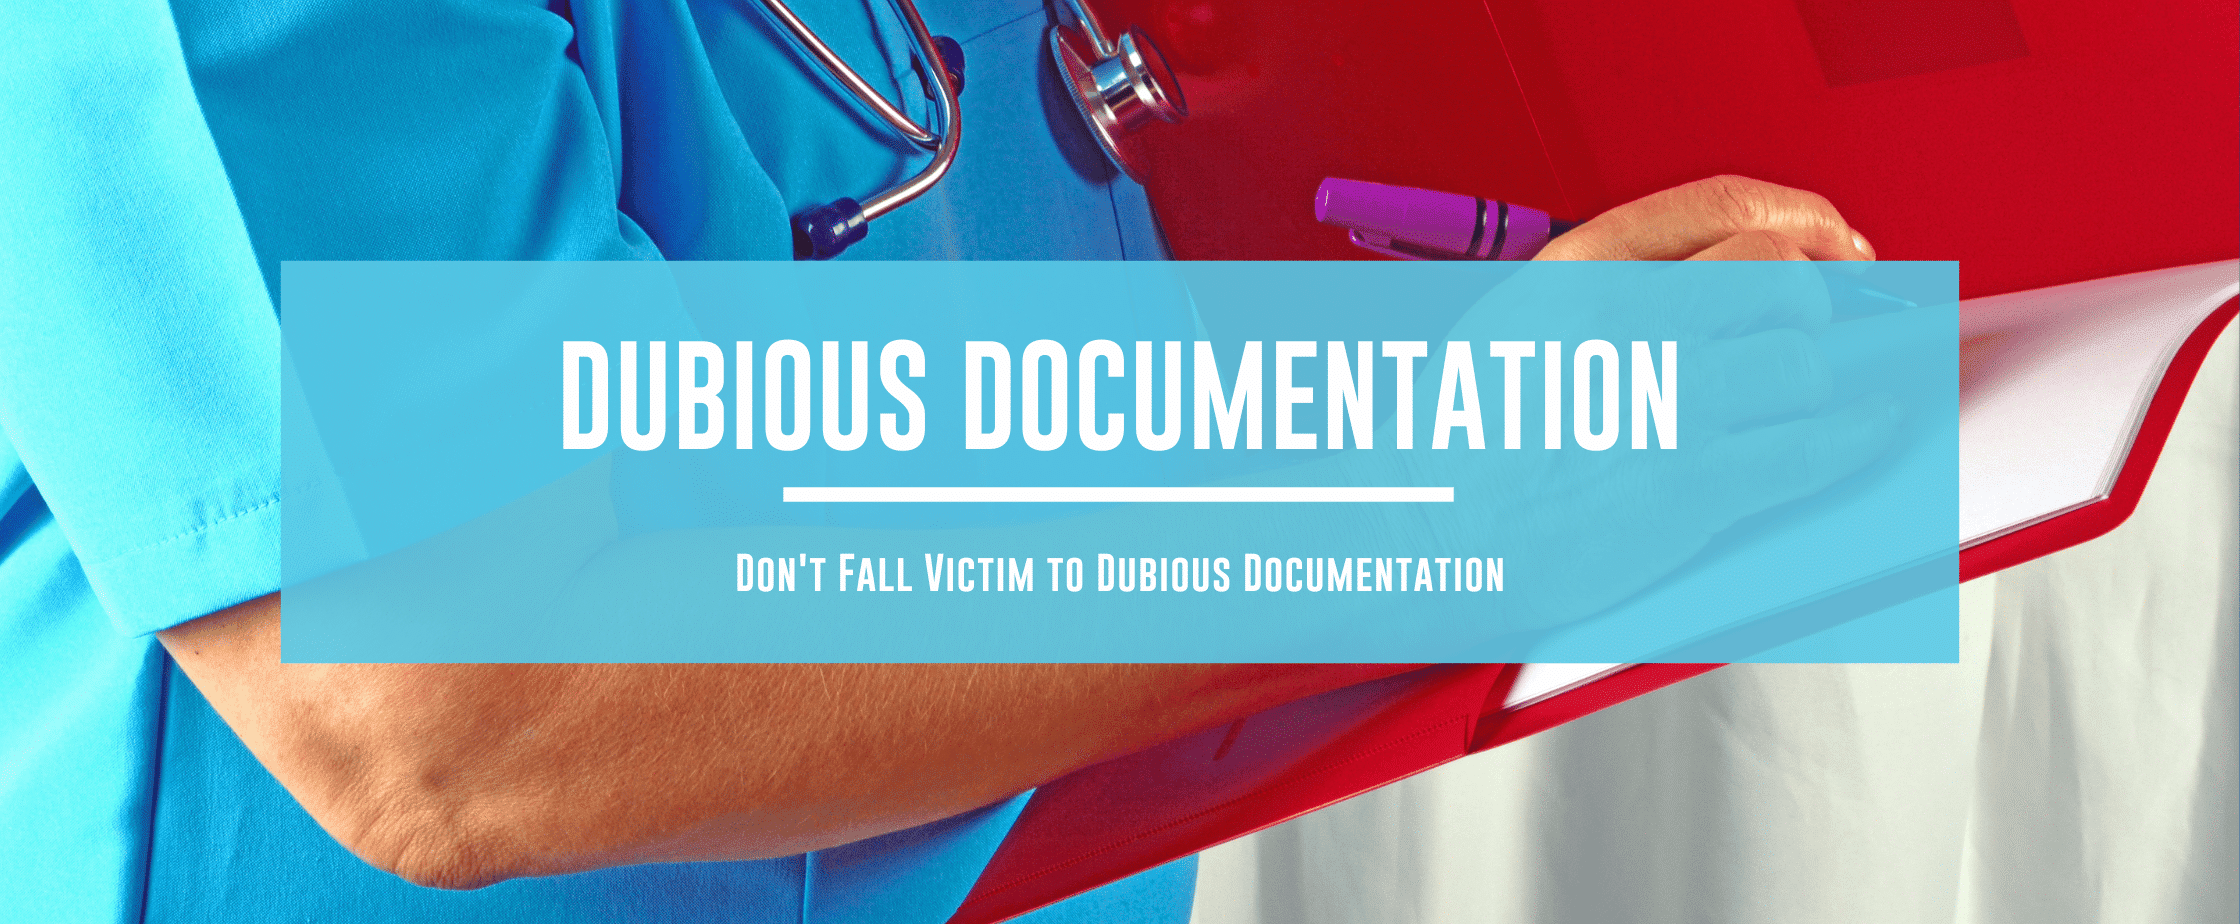 Featured image for Don’t Fall Victim to Dubious Documentation